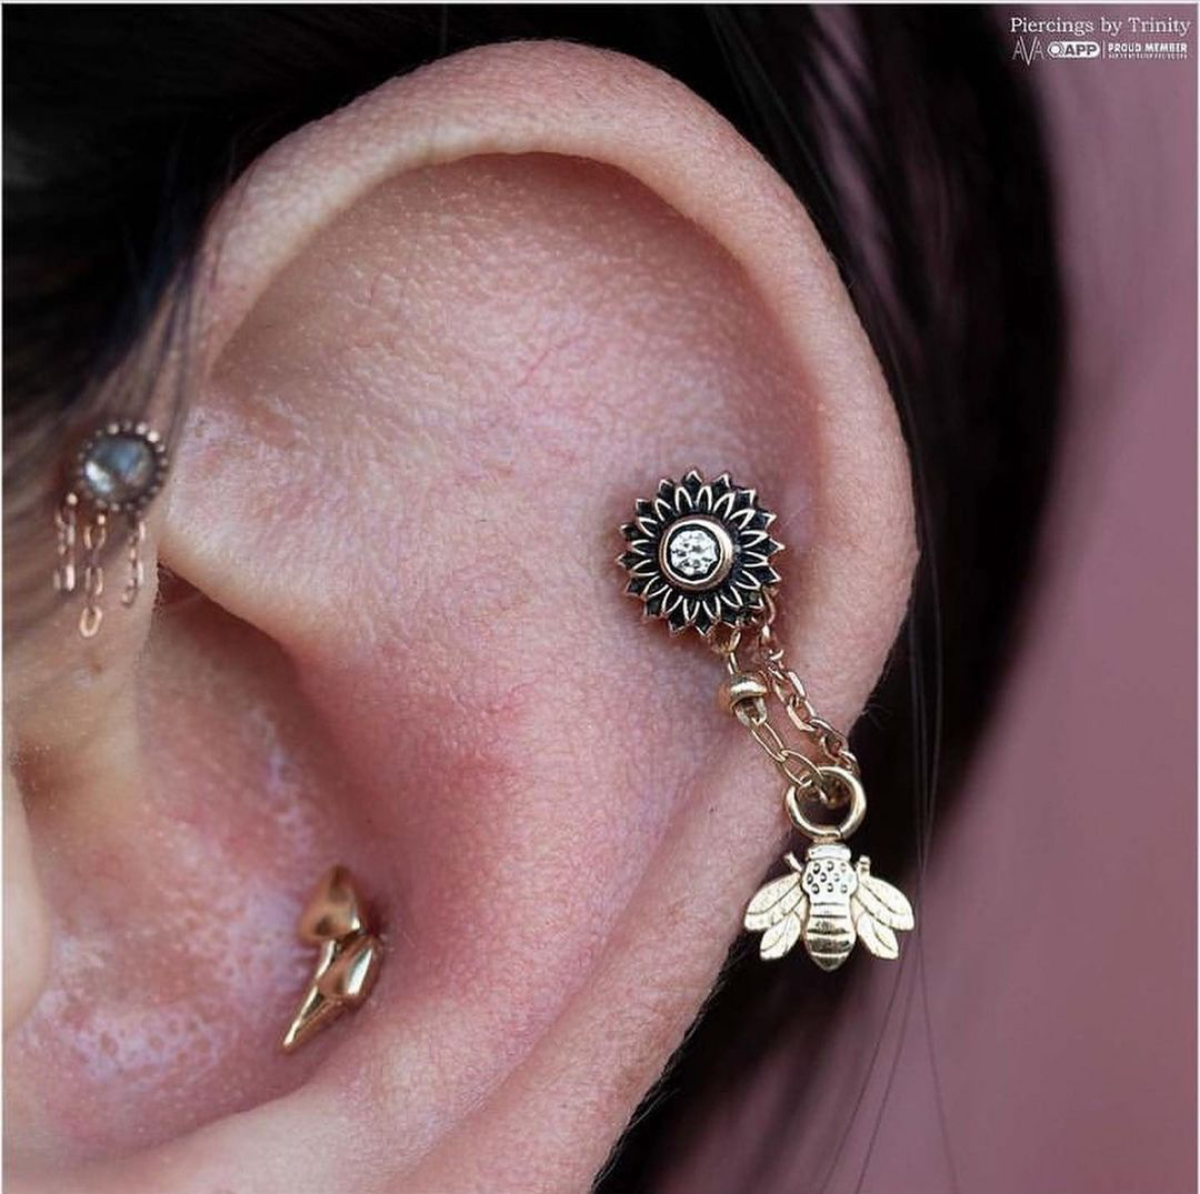 themed helix piercing